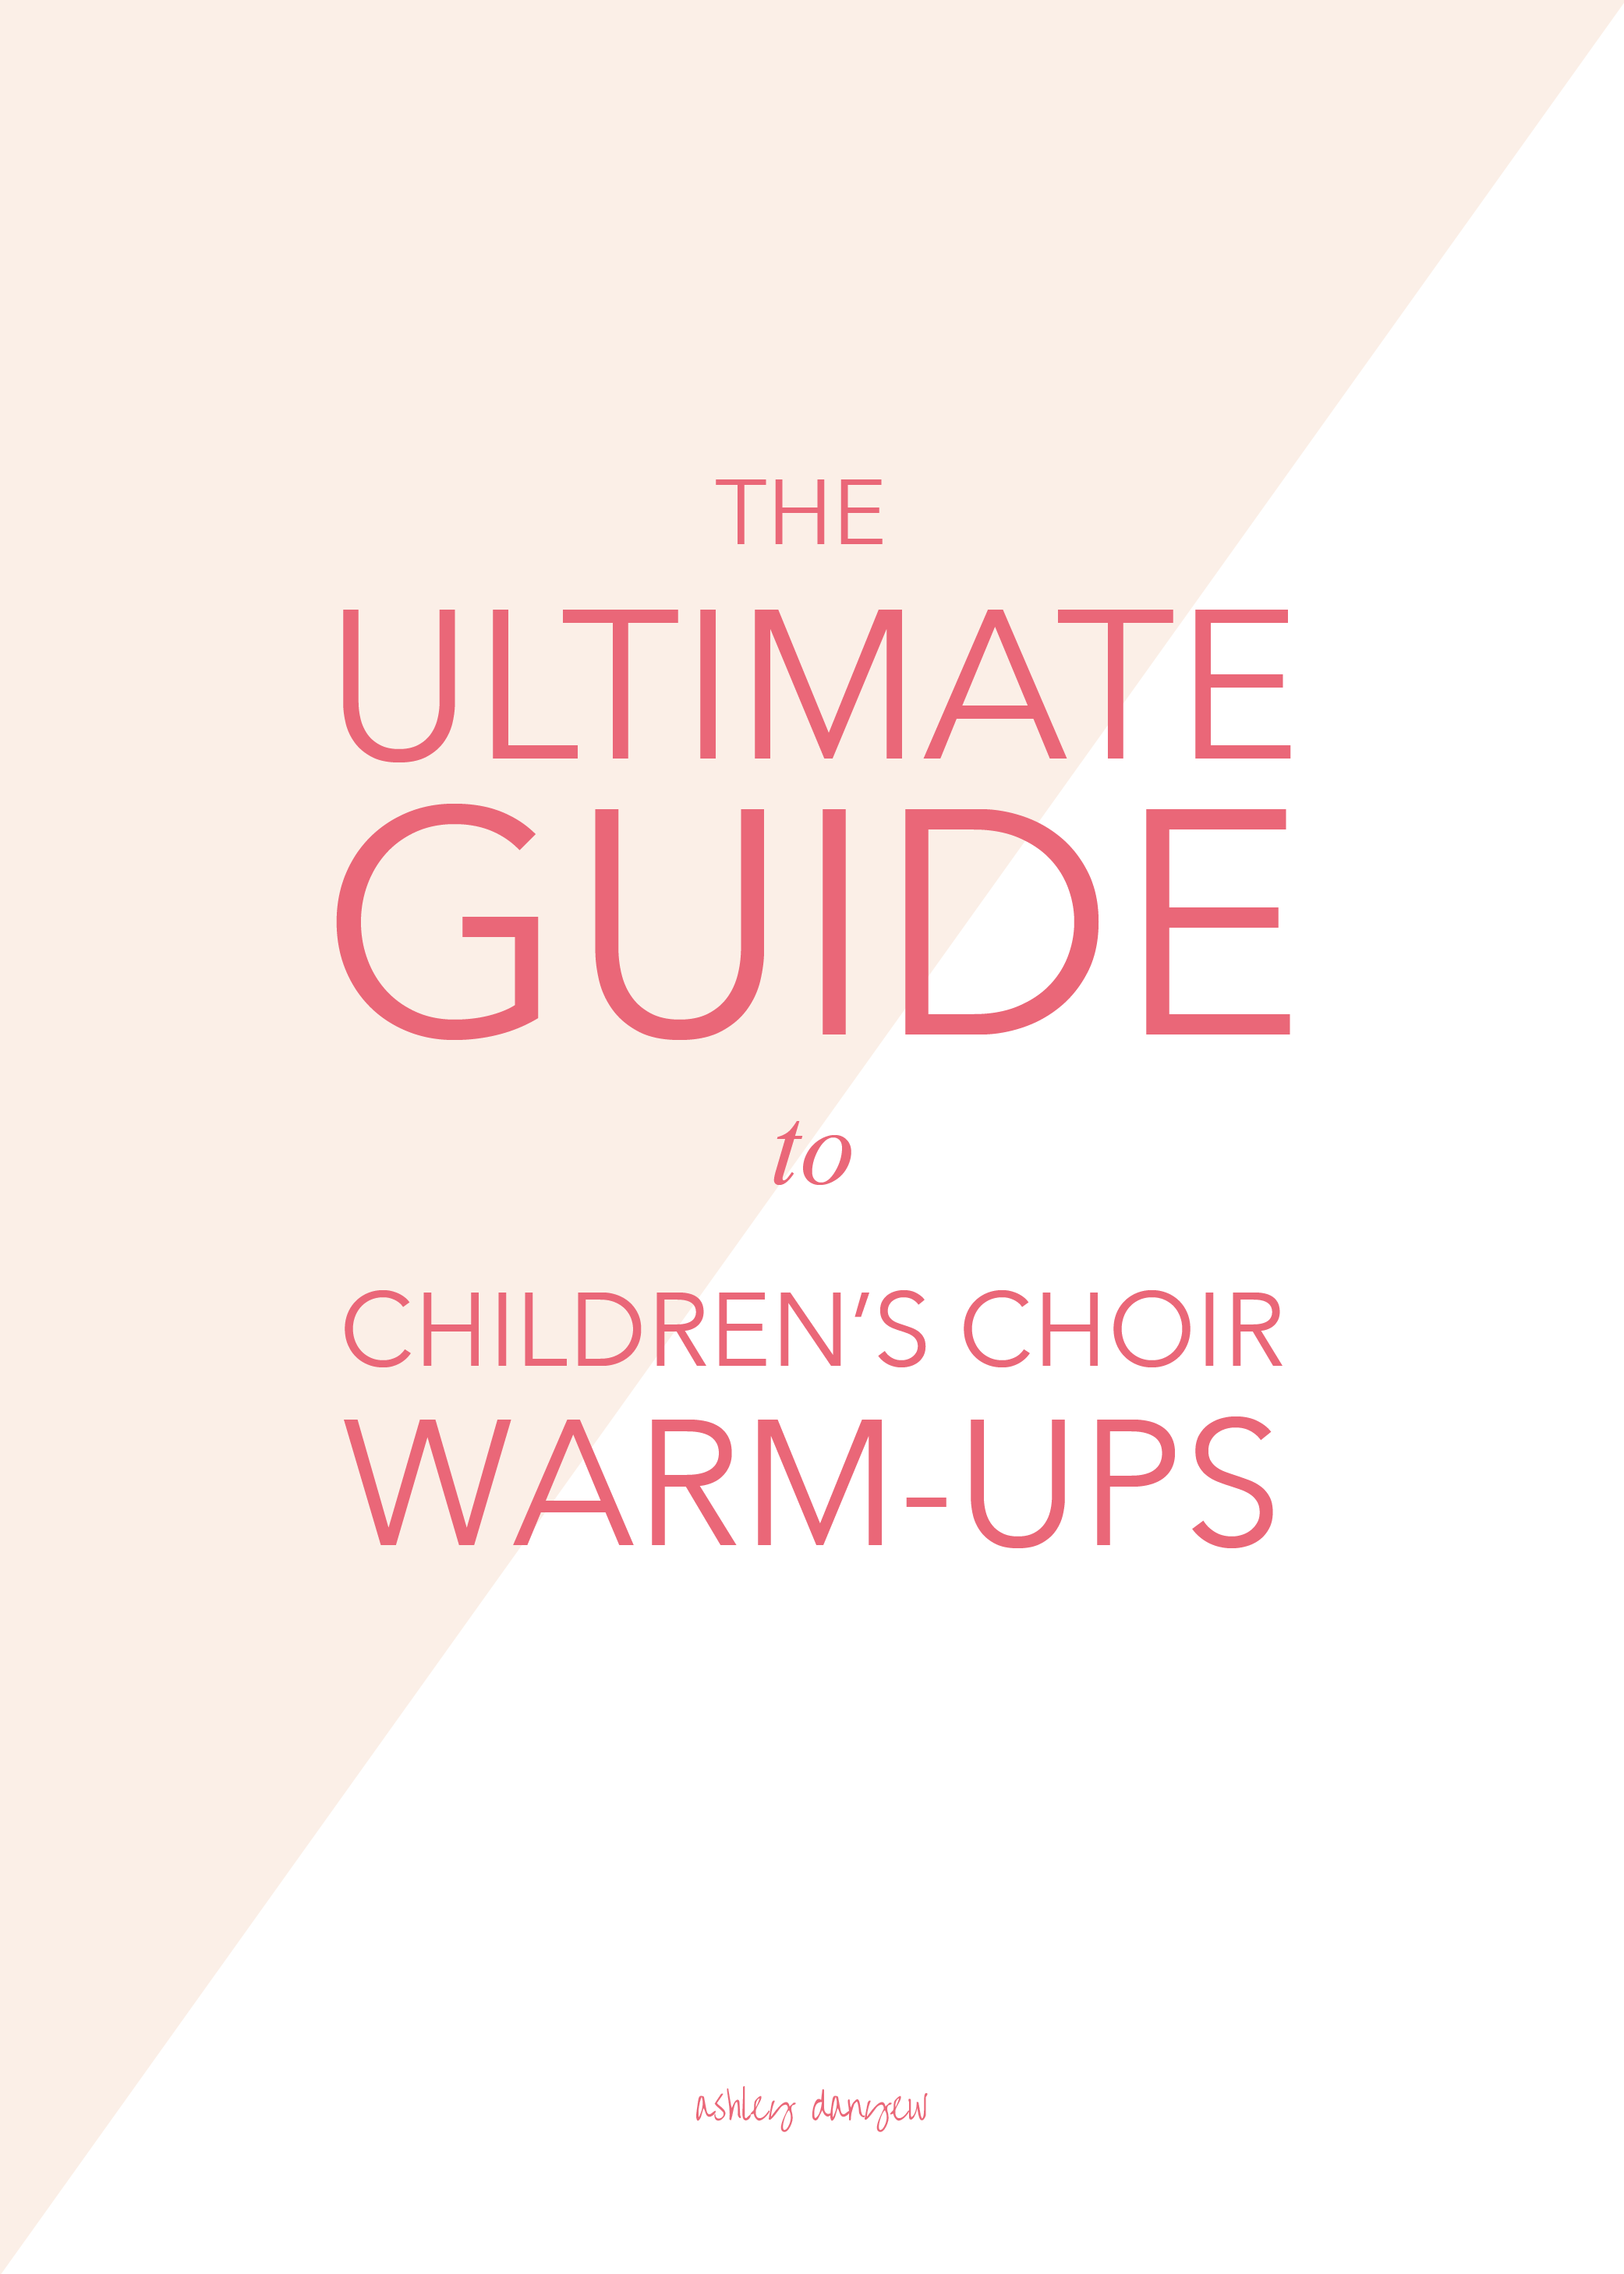 Copy of The Ultimate Guide to Children's Choir Warm-Ups